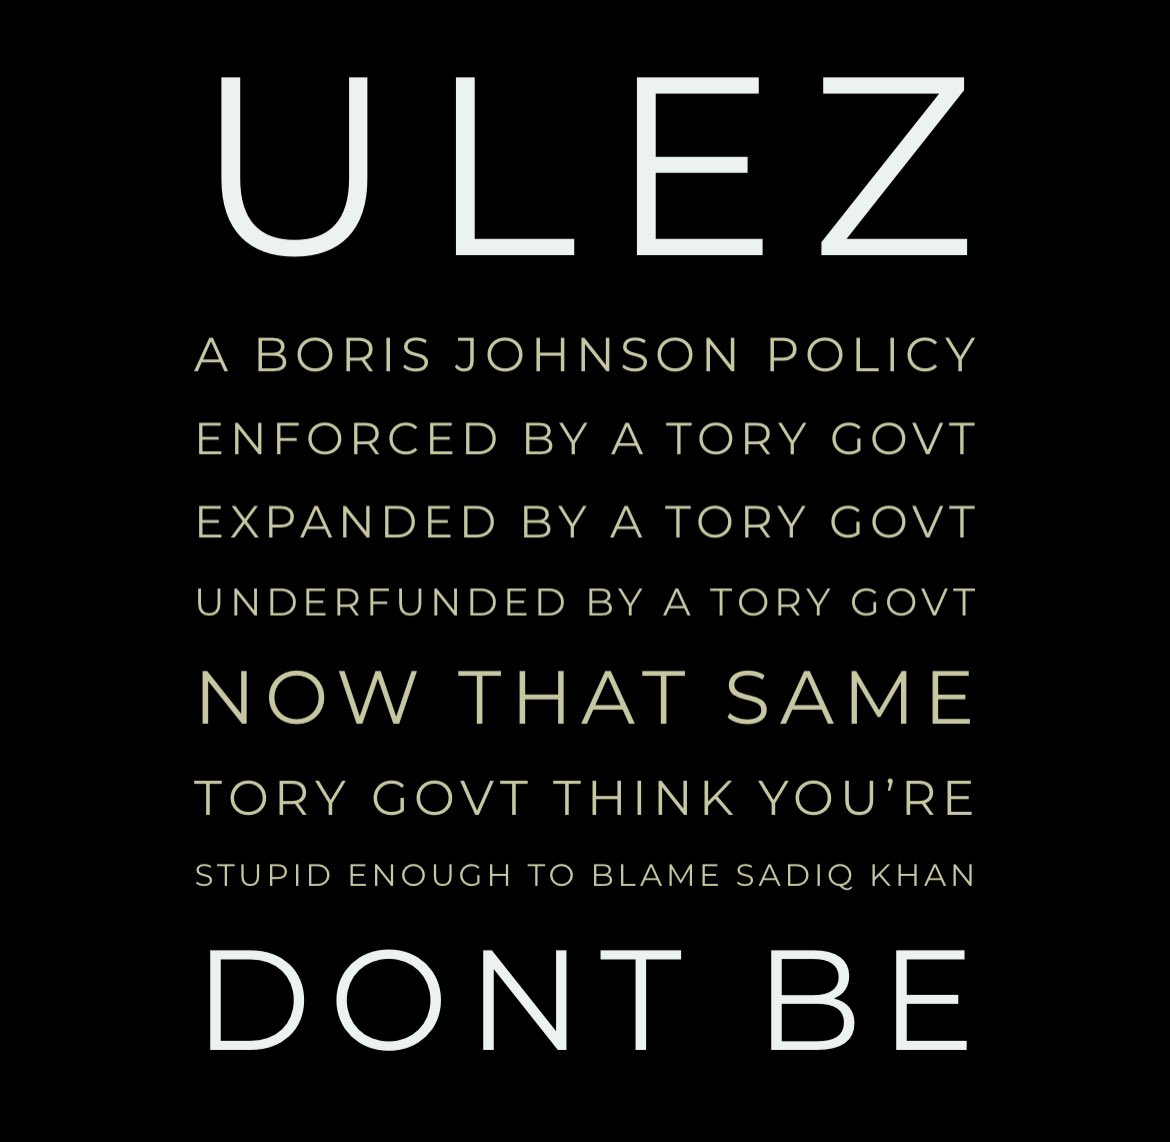 The Tories are out in force with their disinformation on ULEZ… So, here’s another one you can have for free @UKLabour and @SadiqKhan… Pump this out all over social and local press and you might get somewhere: